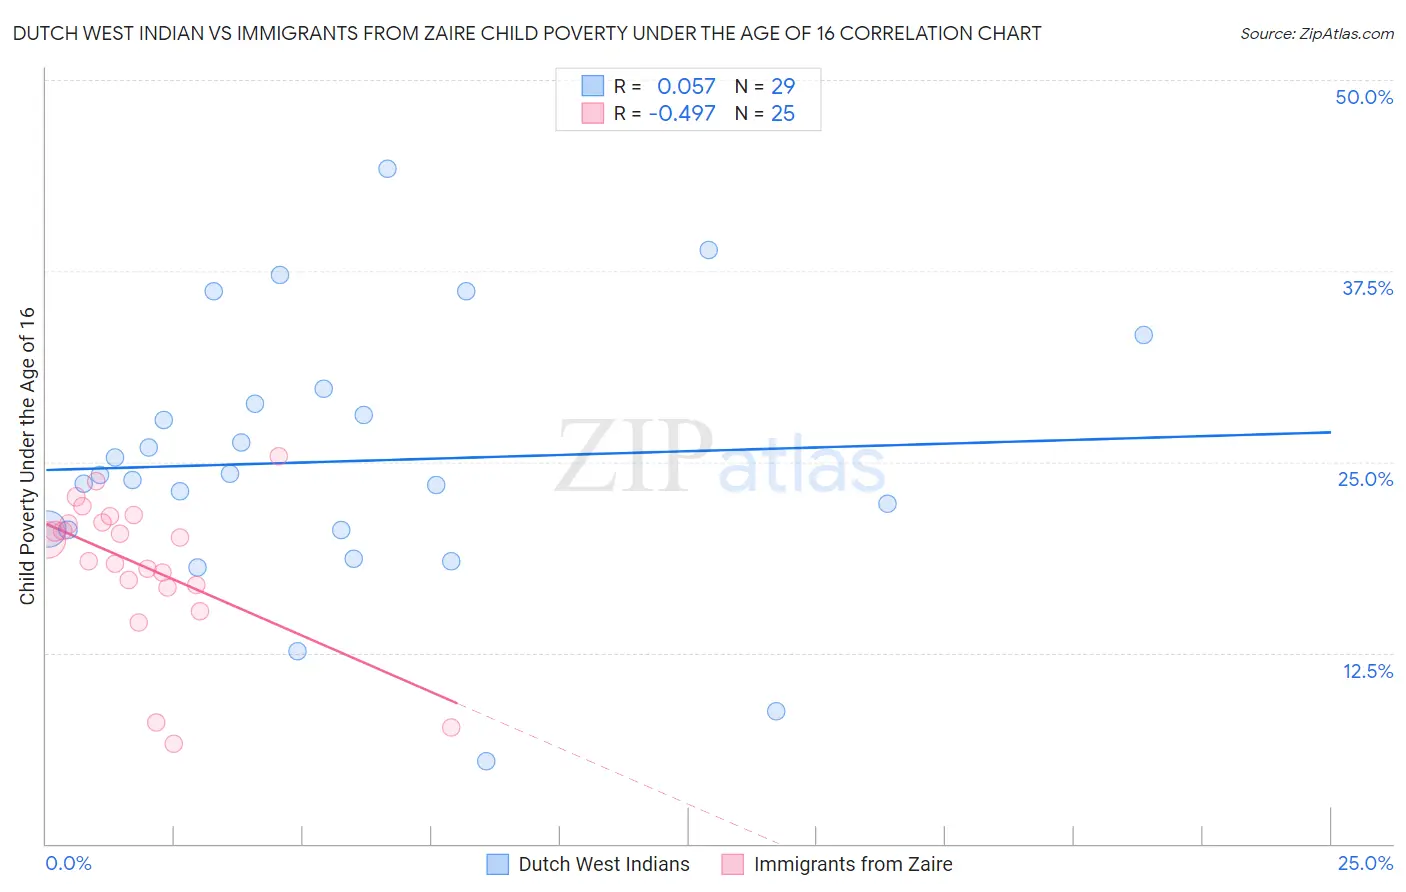 Dutch West Indian vs Immigrants from Zaire Child Poverty Under the Age of 16